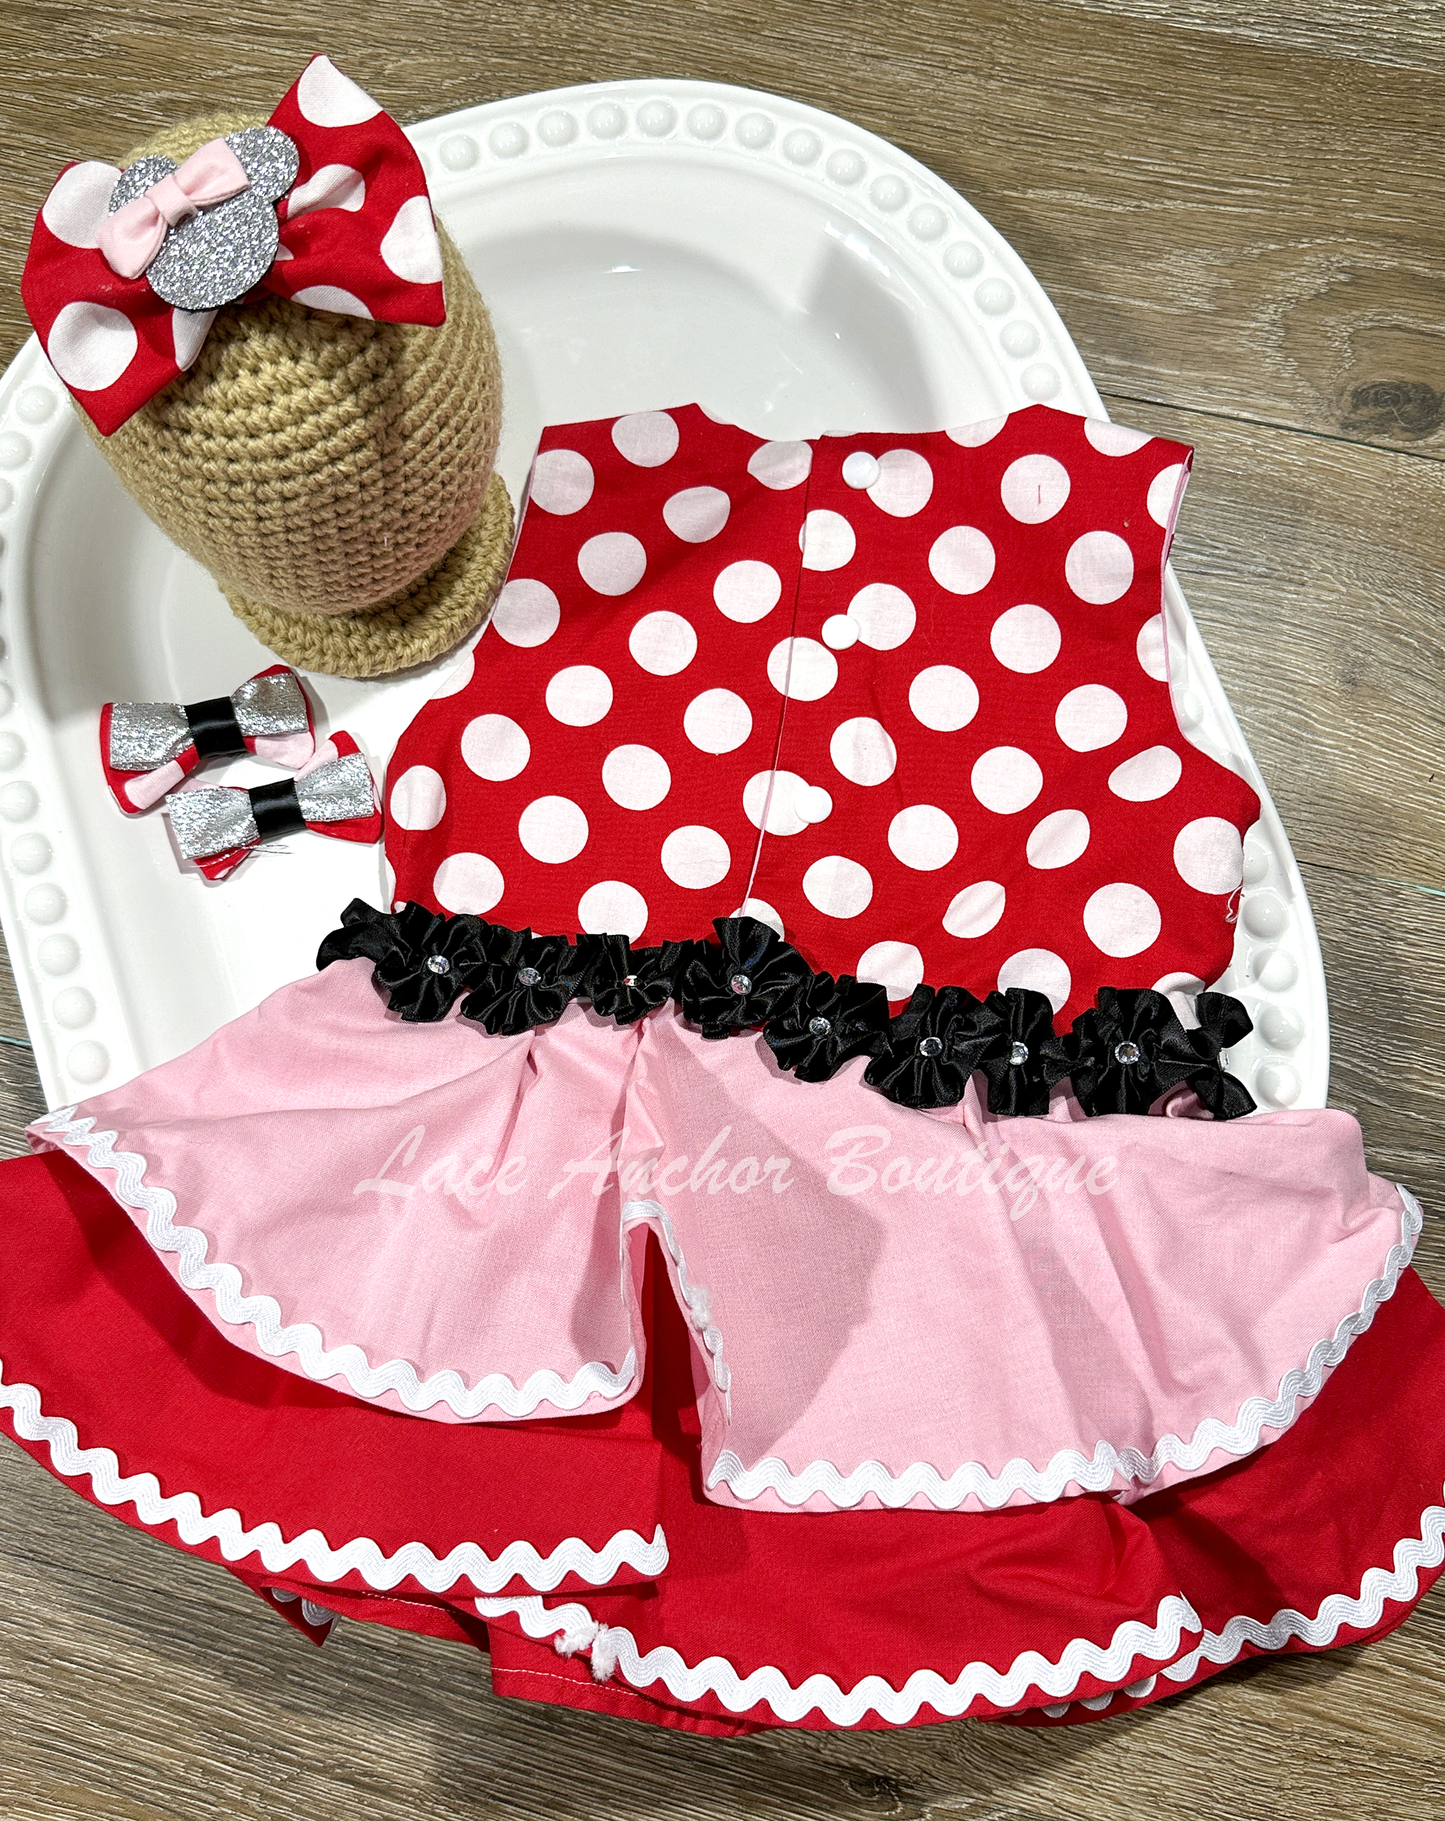 Toddler girls mouse polka dotted dress for pageant or second birthday party photoshoot. Red and pink floral baby girls dress.